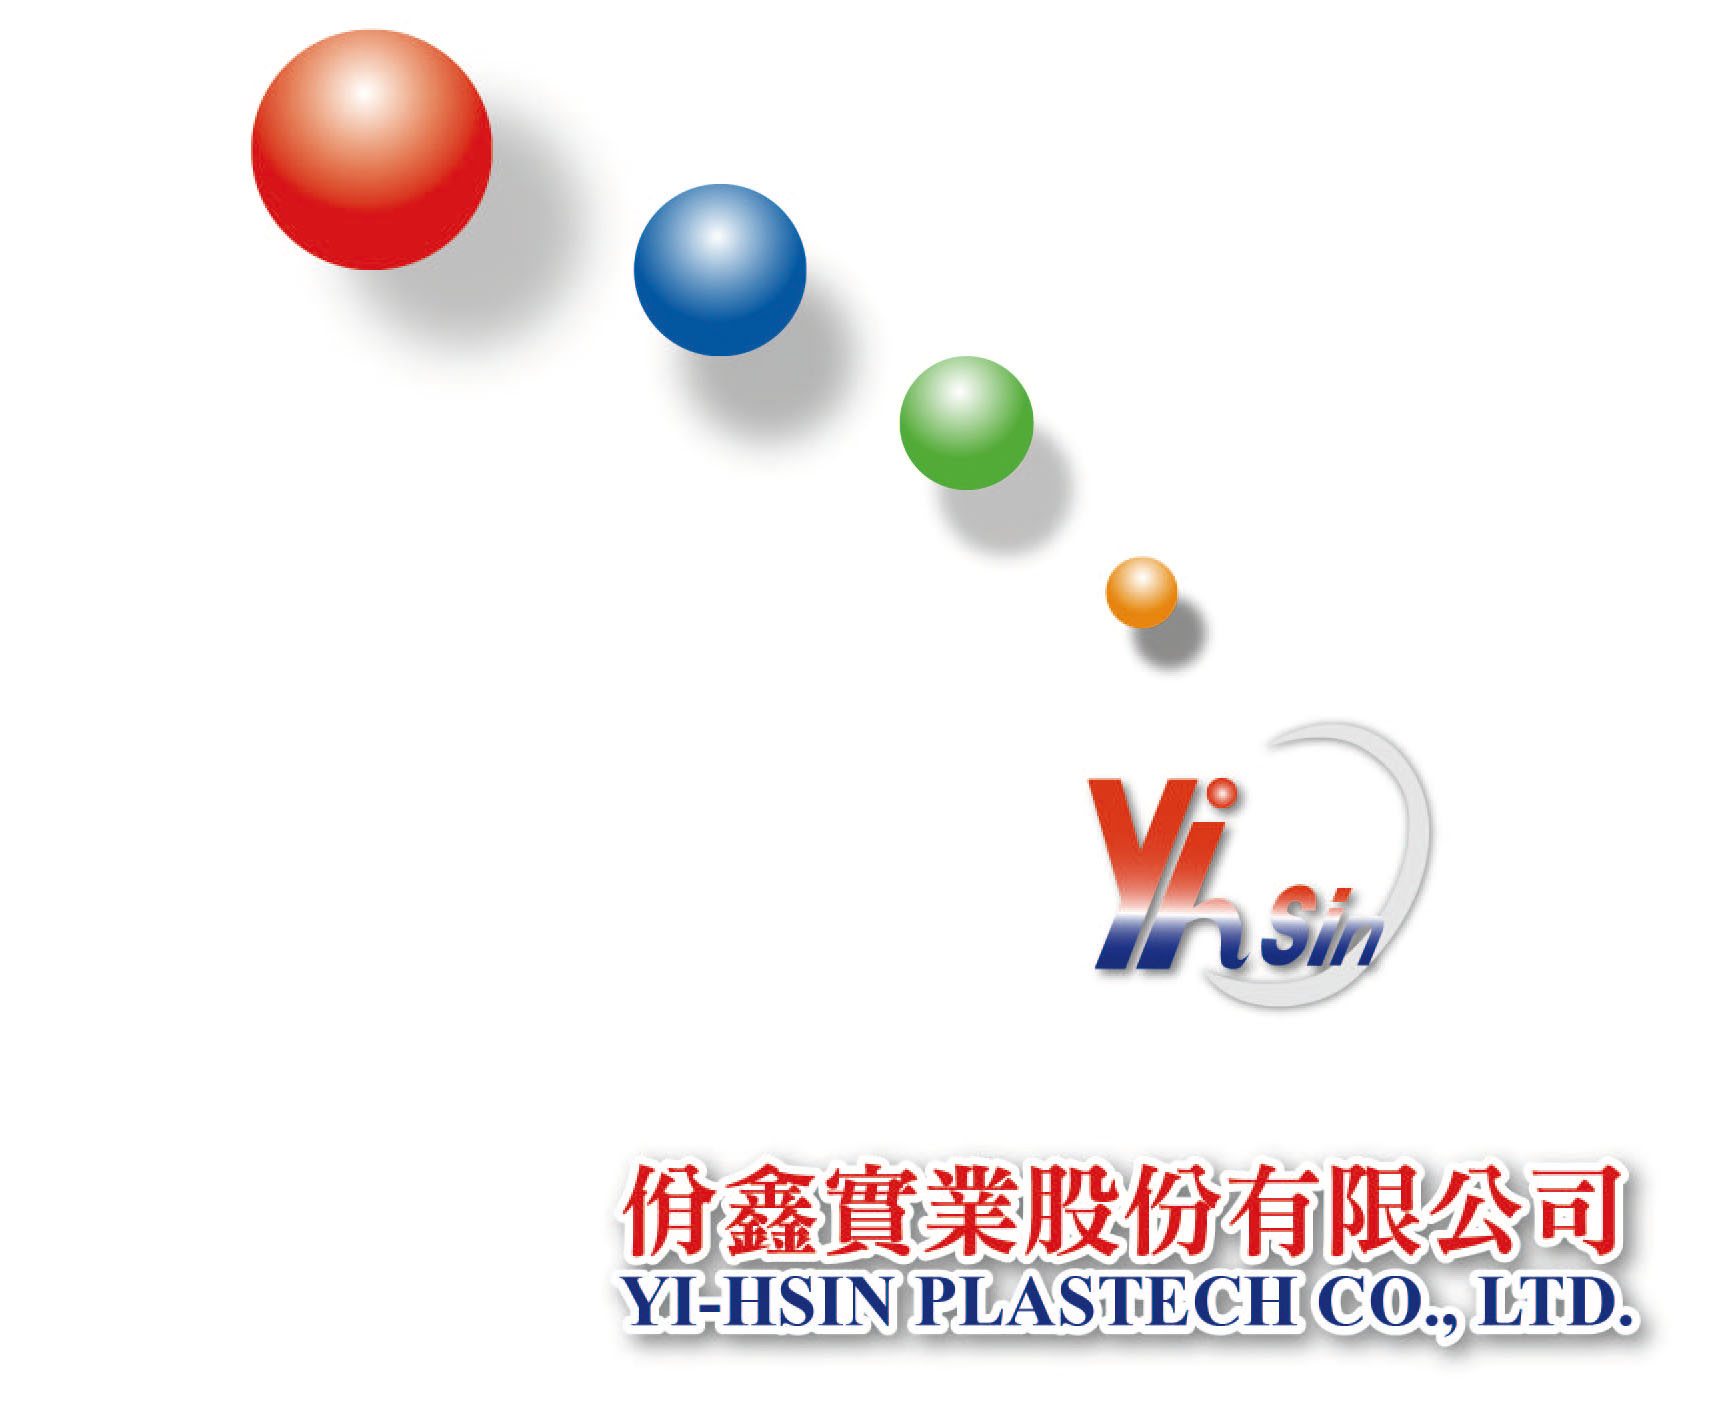 You are currently viewing Yi-Hsin Plastech Co., Ltd. has no other branches or agents in China.